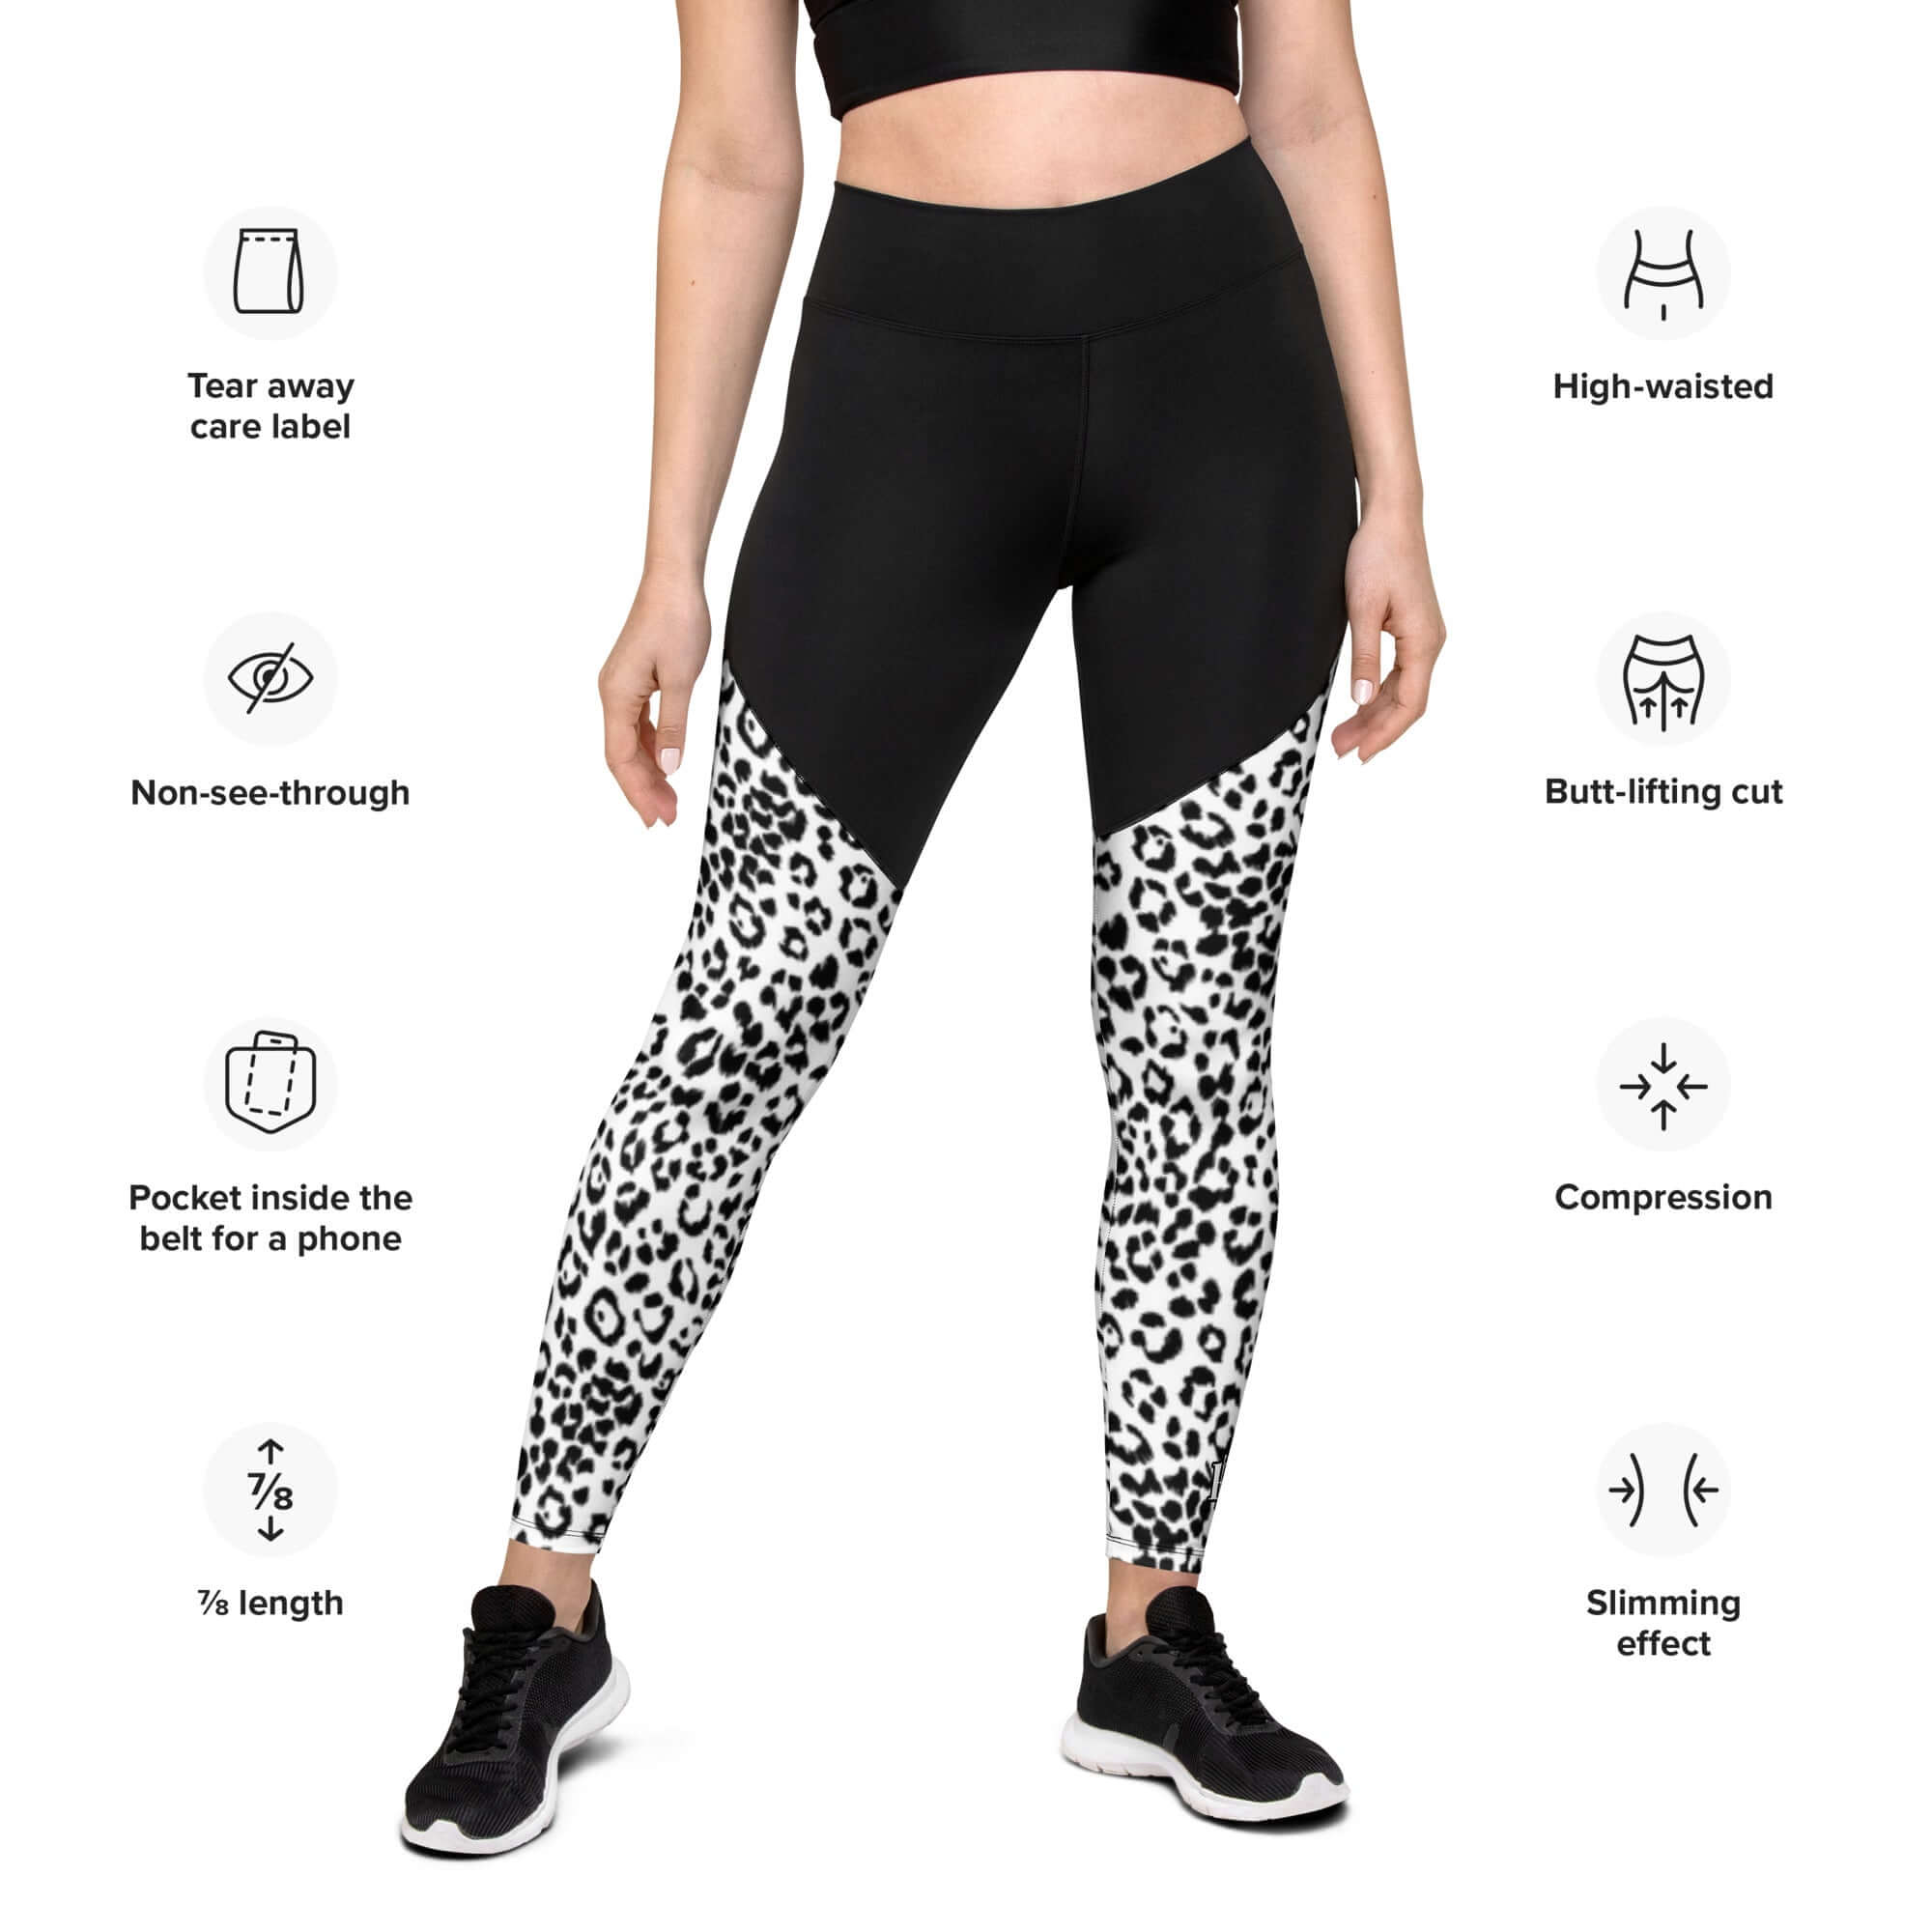 Sports Leggings with Phone Pocket in Black and White Print - Revive Wear     Enhance your workouts with Revive Wear AU's Sports Leggings featuring a convenient phone pocket. Stay connected and stylish during your fitness routine. Shop now!